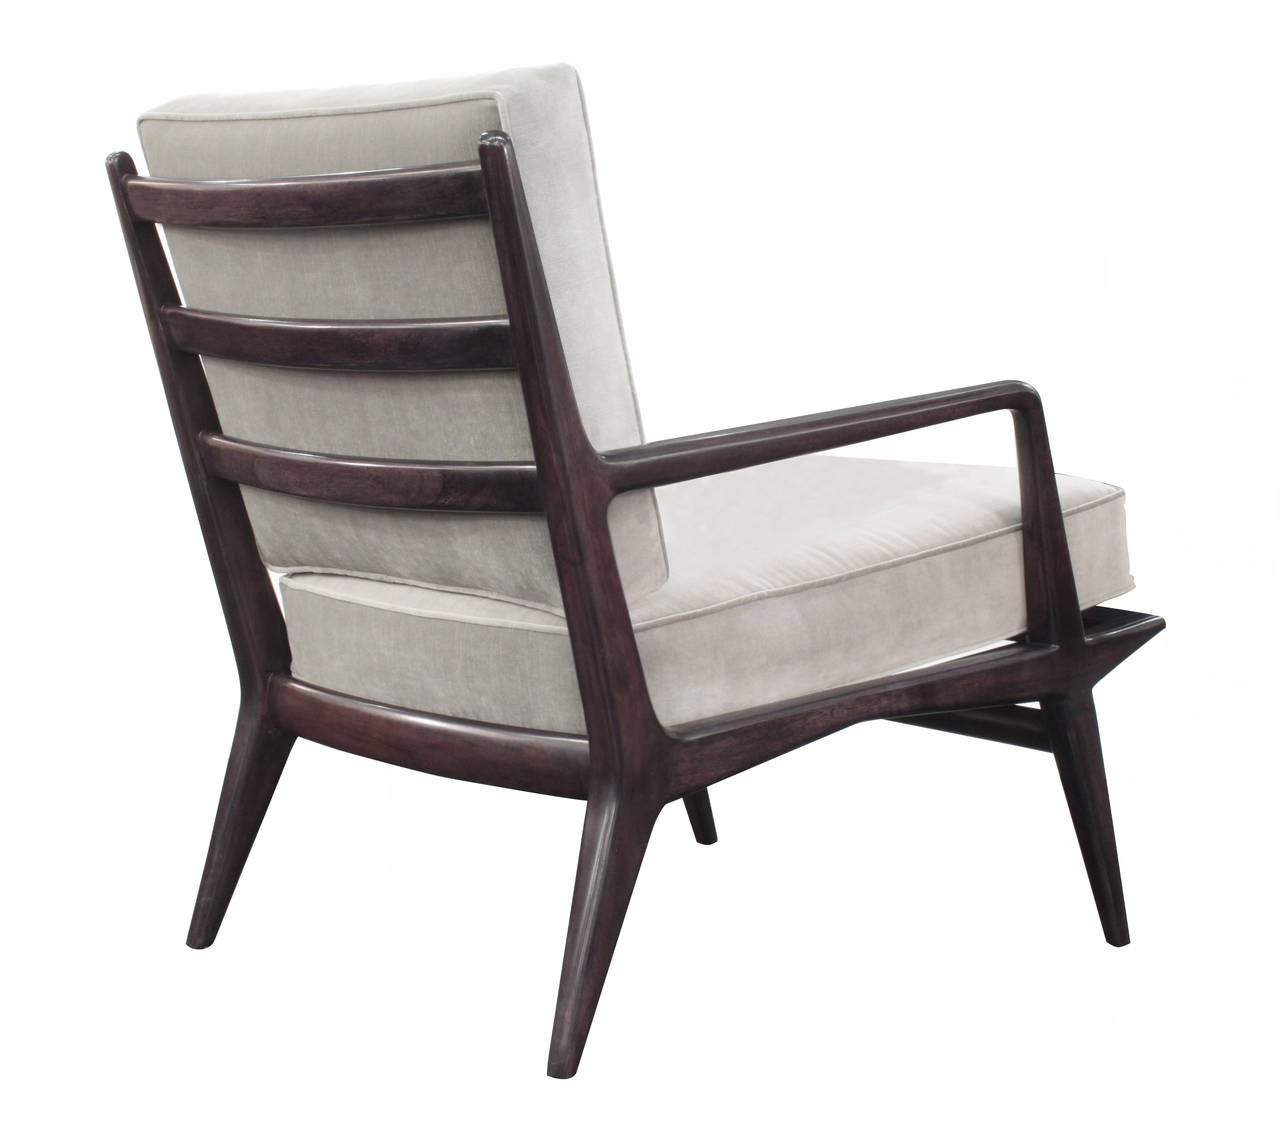 Mid-20th Century Sculptural Lounge Chair and Ottoman by Carlo de Carli